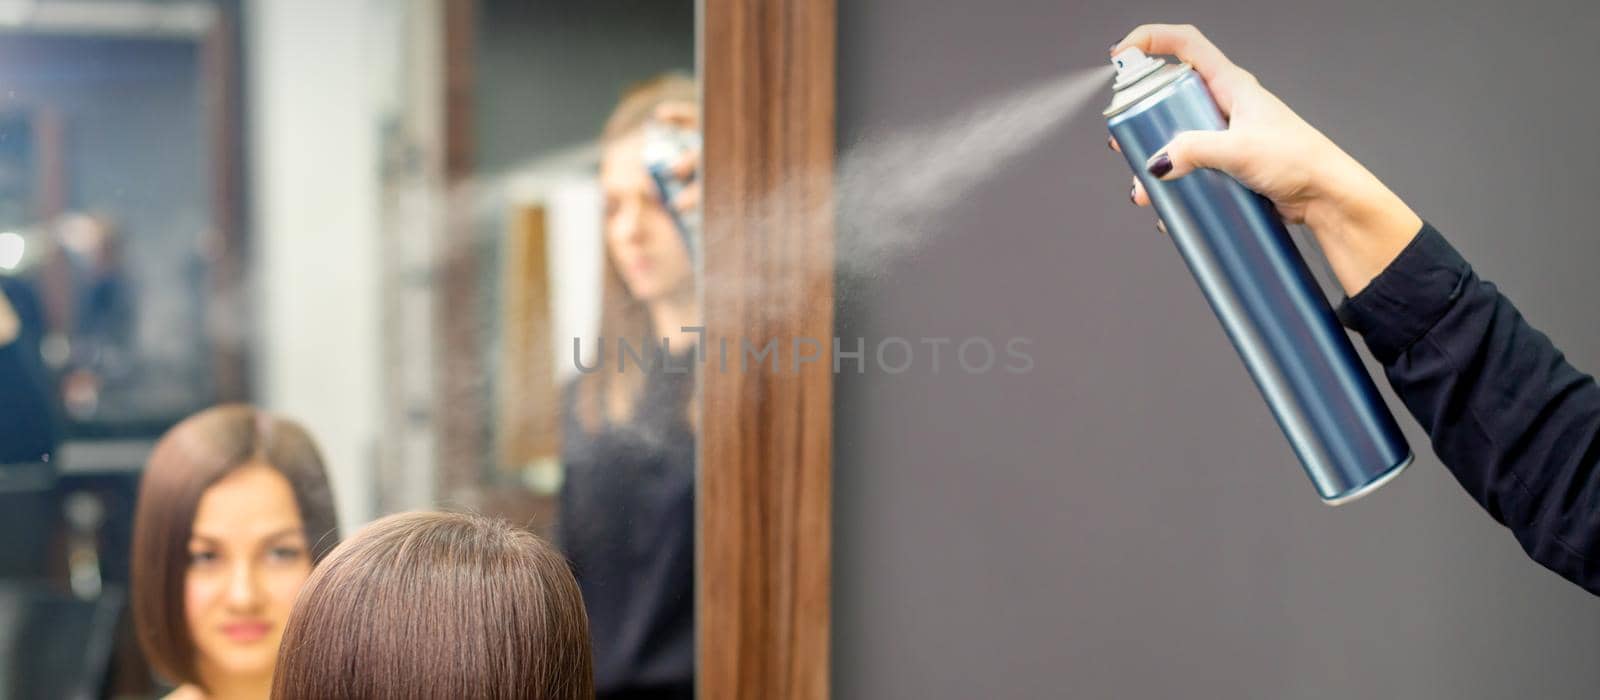 A hairdresser is using hair spray to fix the short hairstyle of the young brunette woman sitting in the hair salon. by okskukuruza